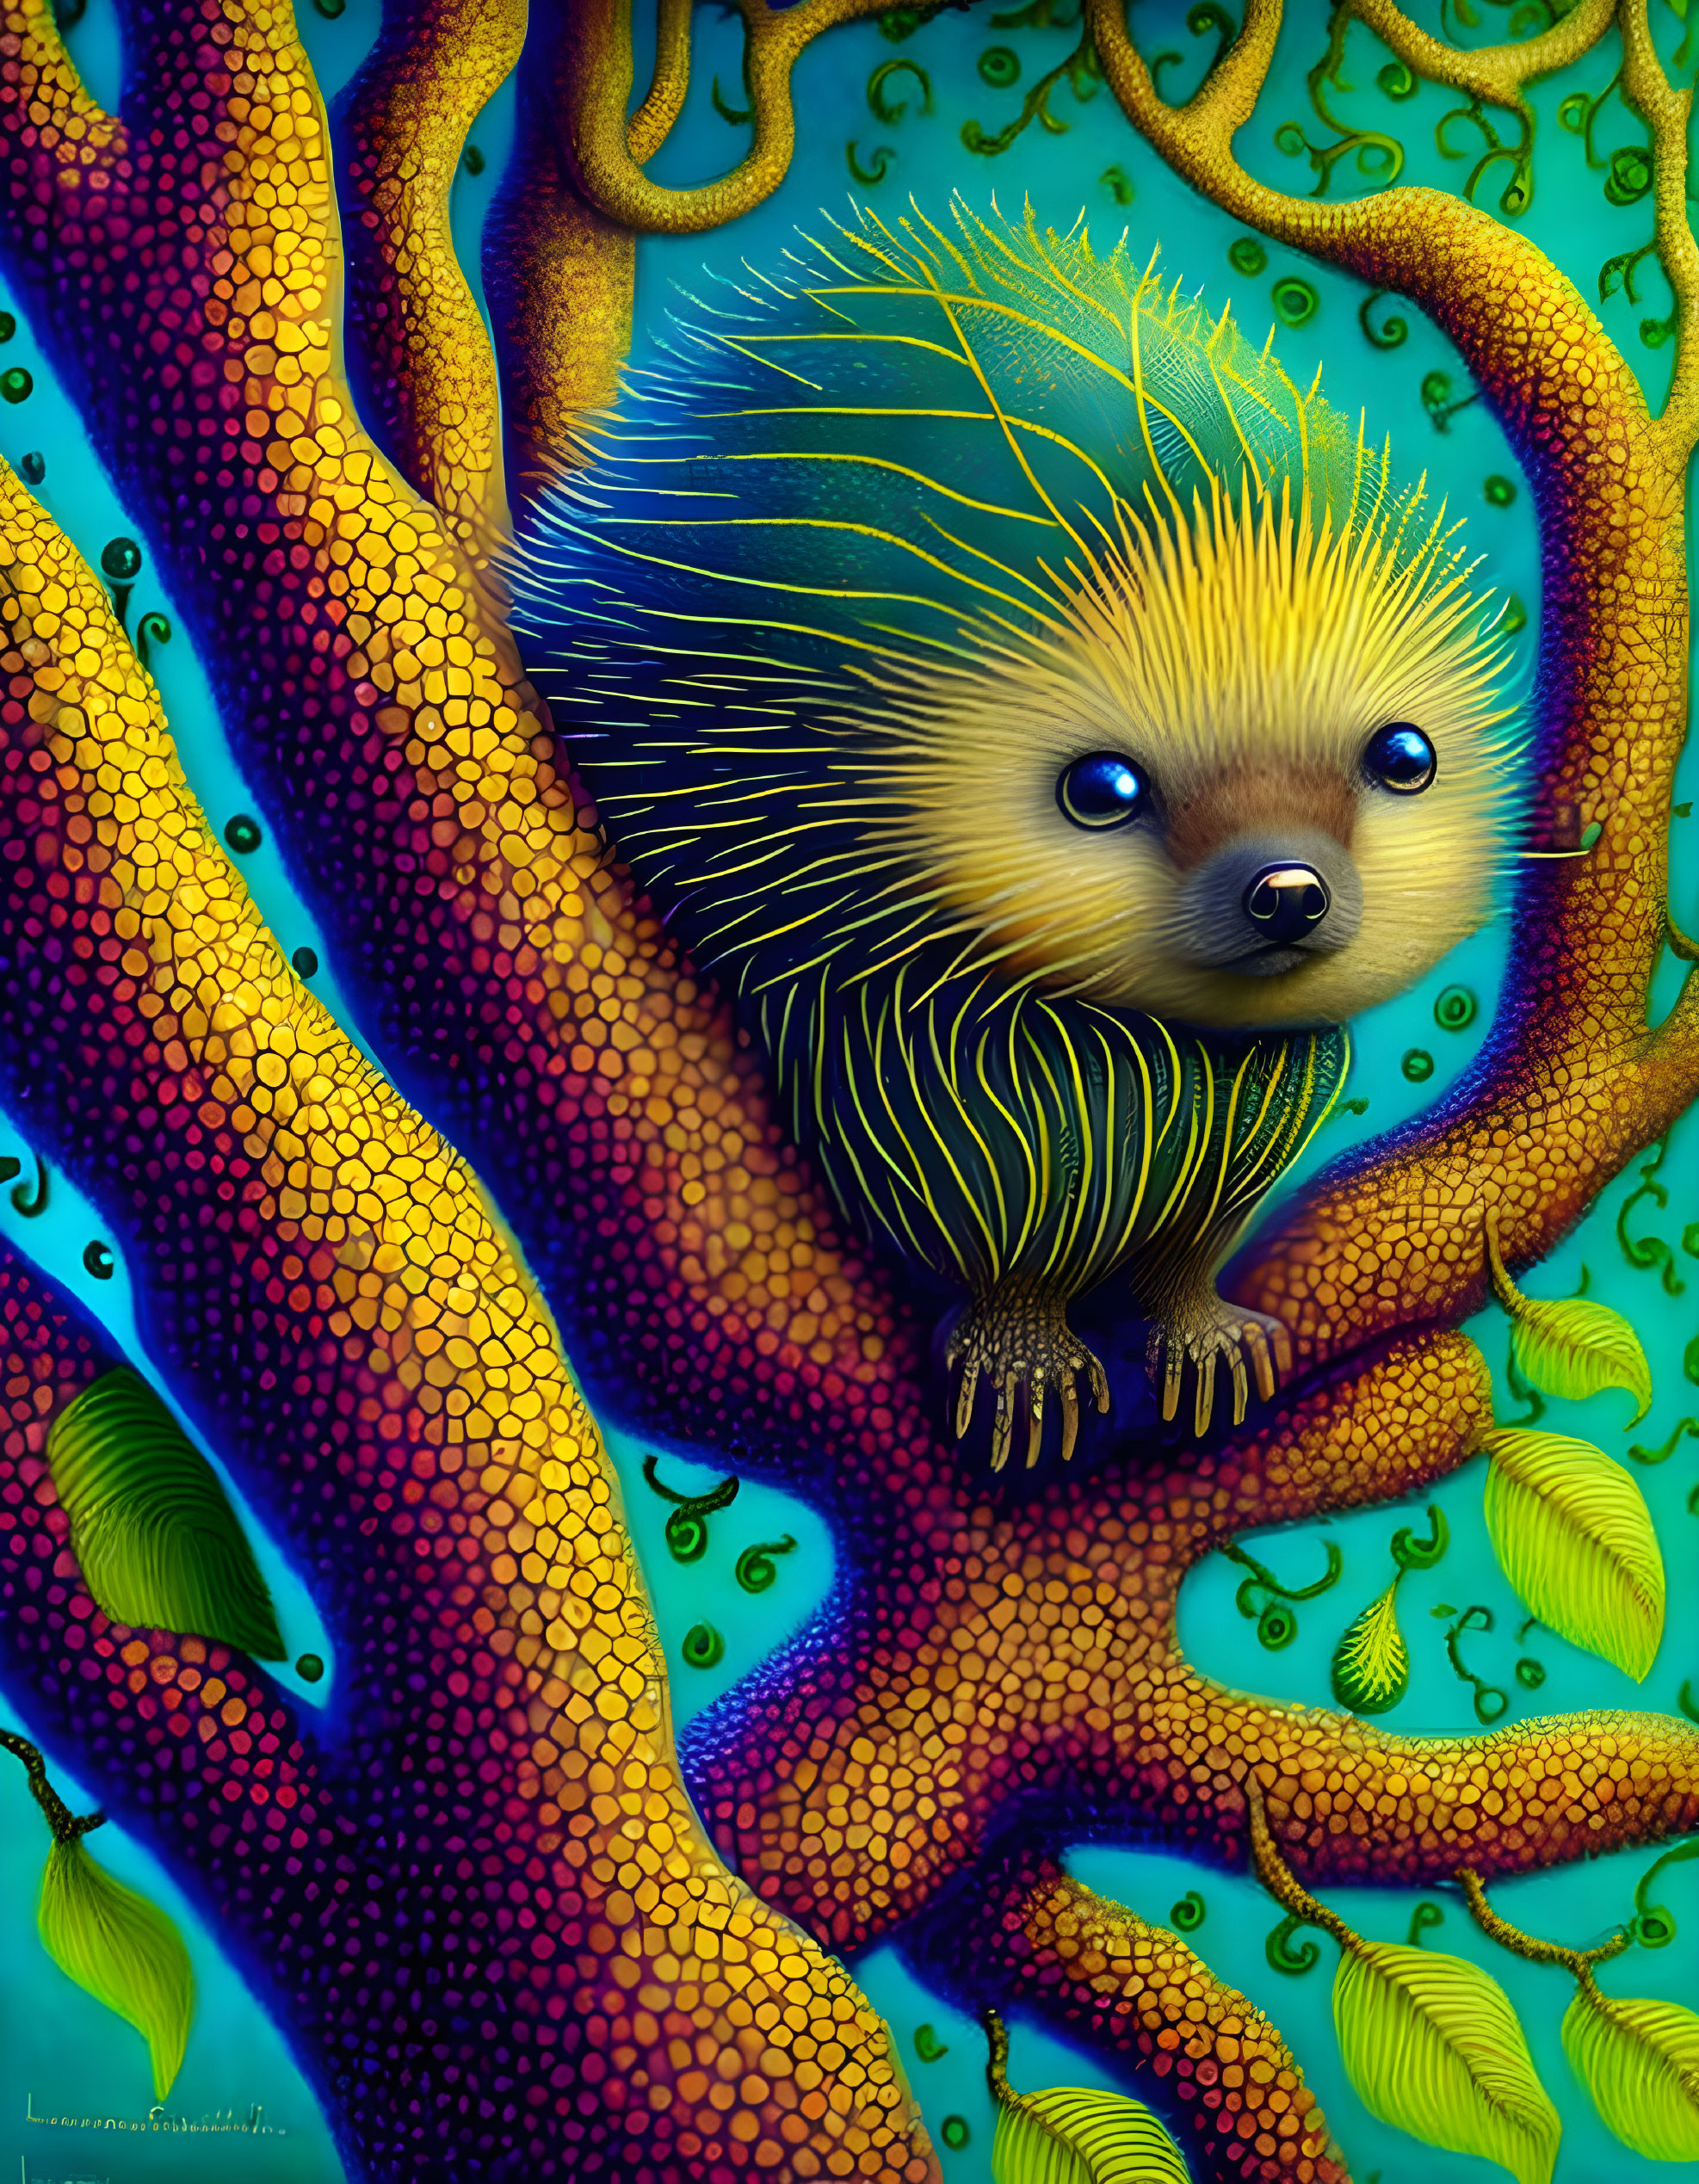 Colorful Hedgehog with Glowing Quills in Nature Scene